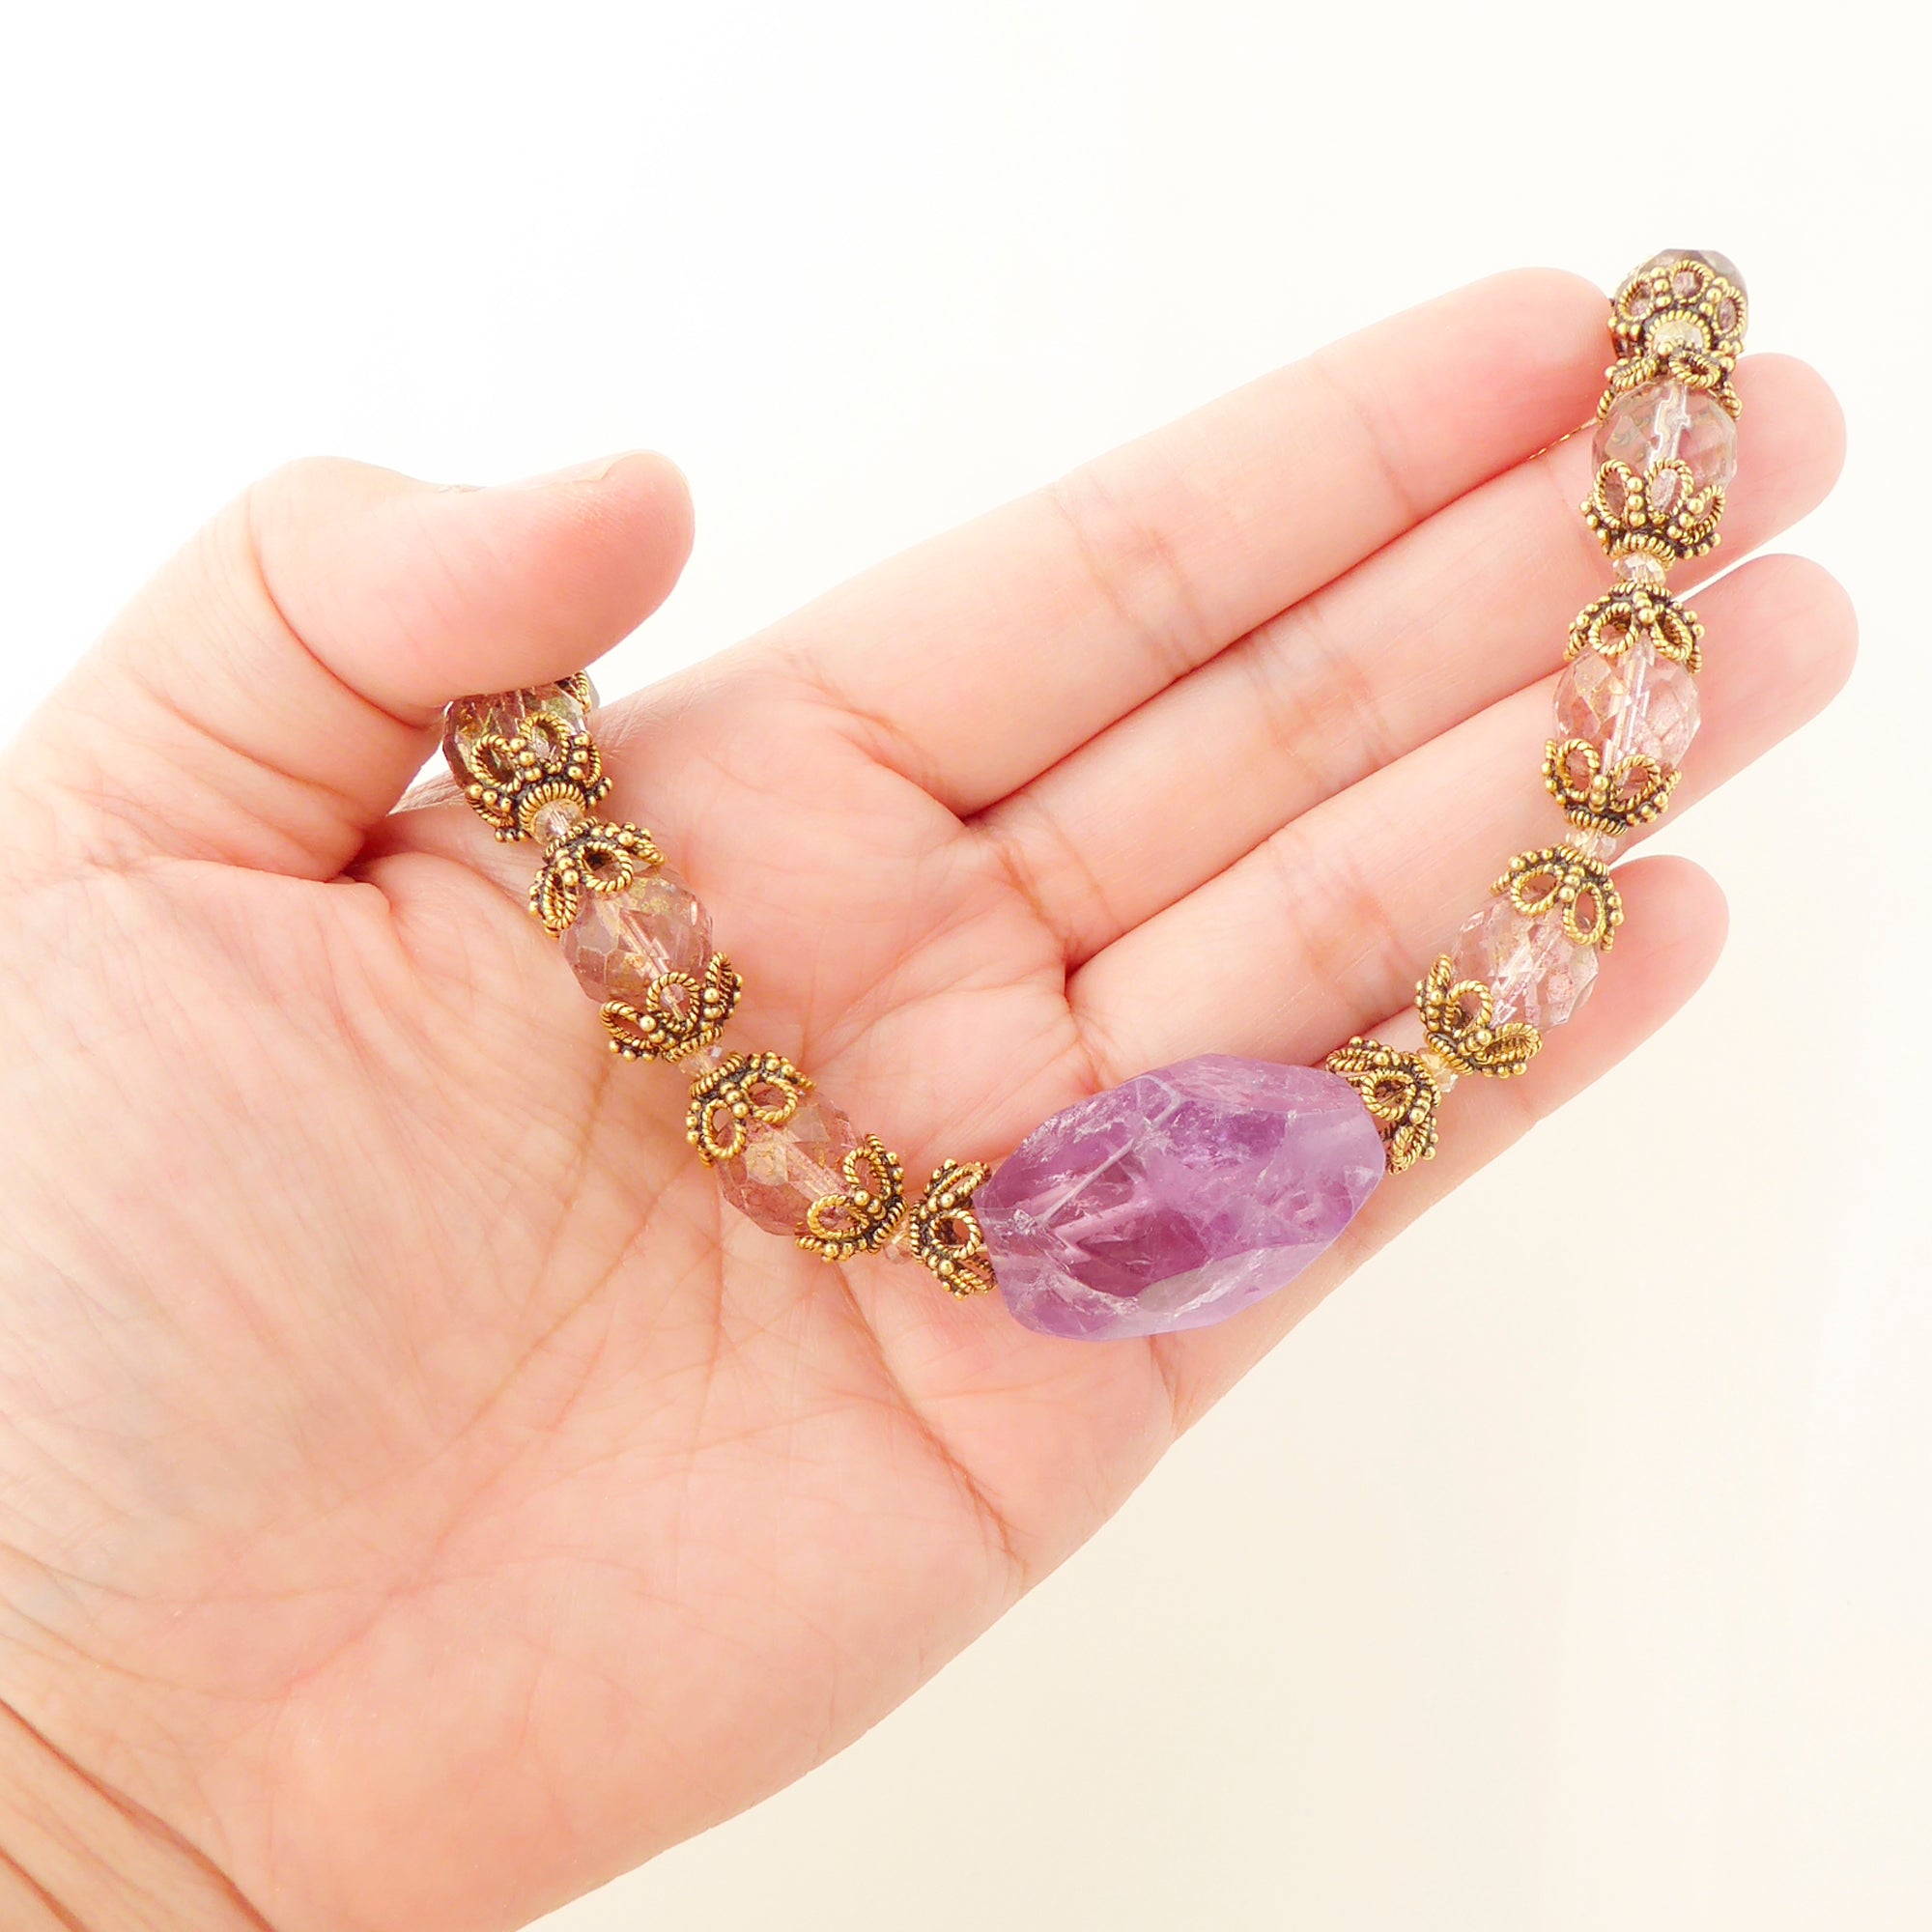 Amethyst rococo necklace by Jenny Dayco 7